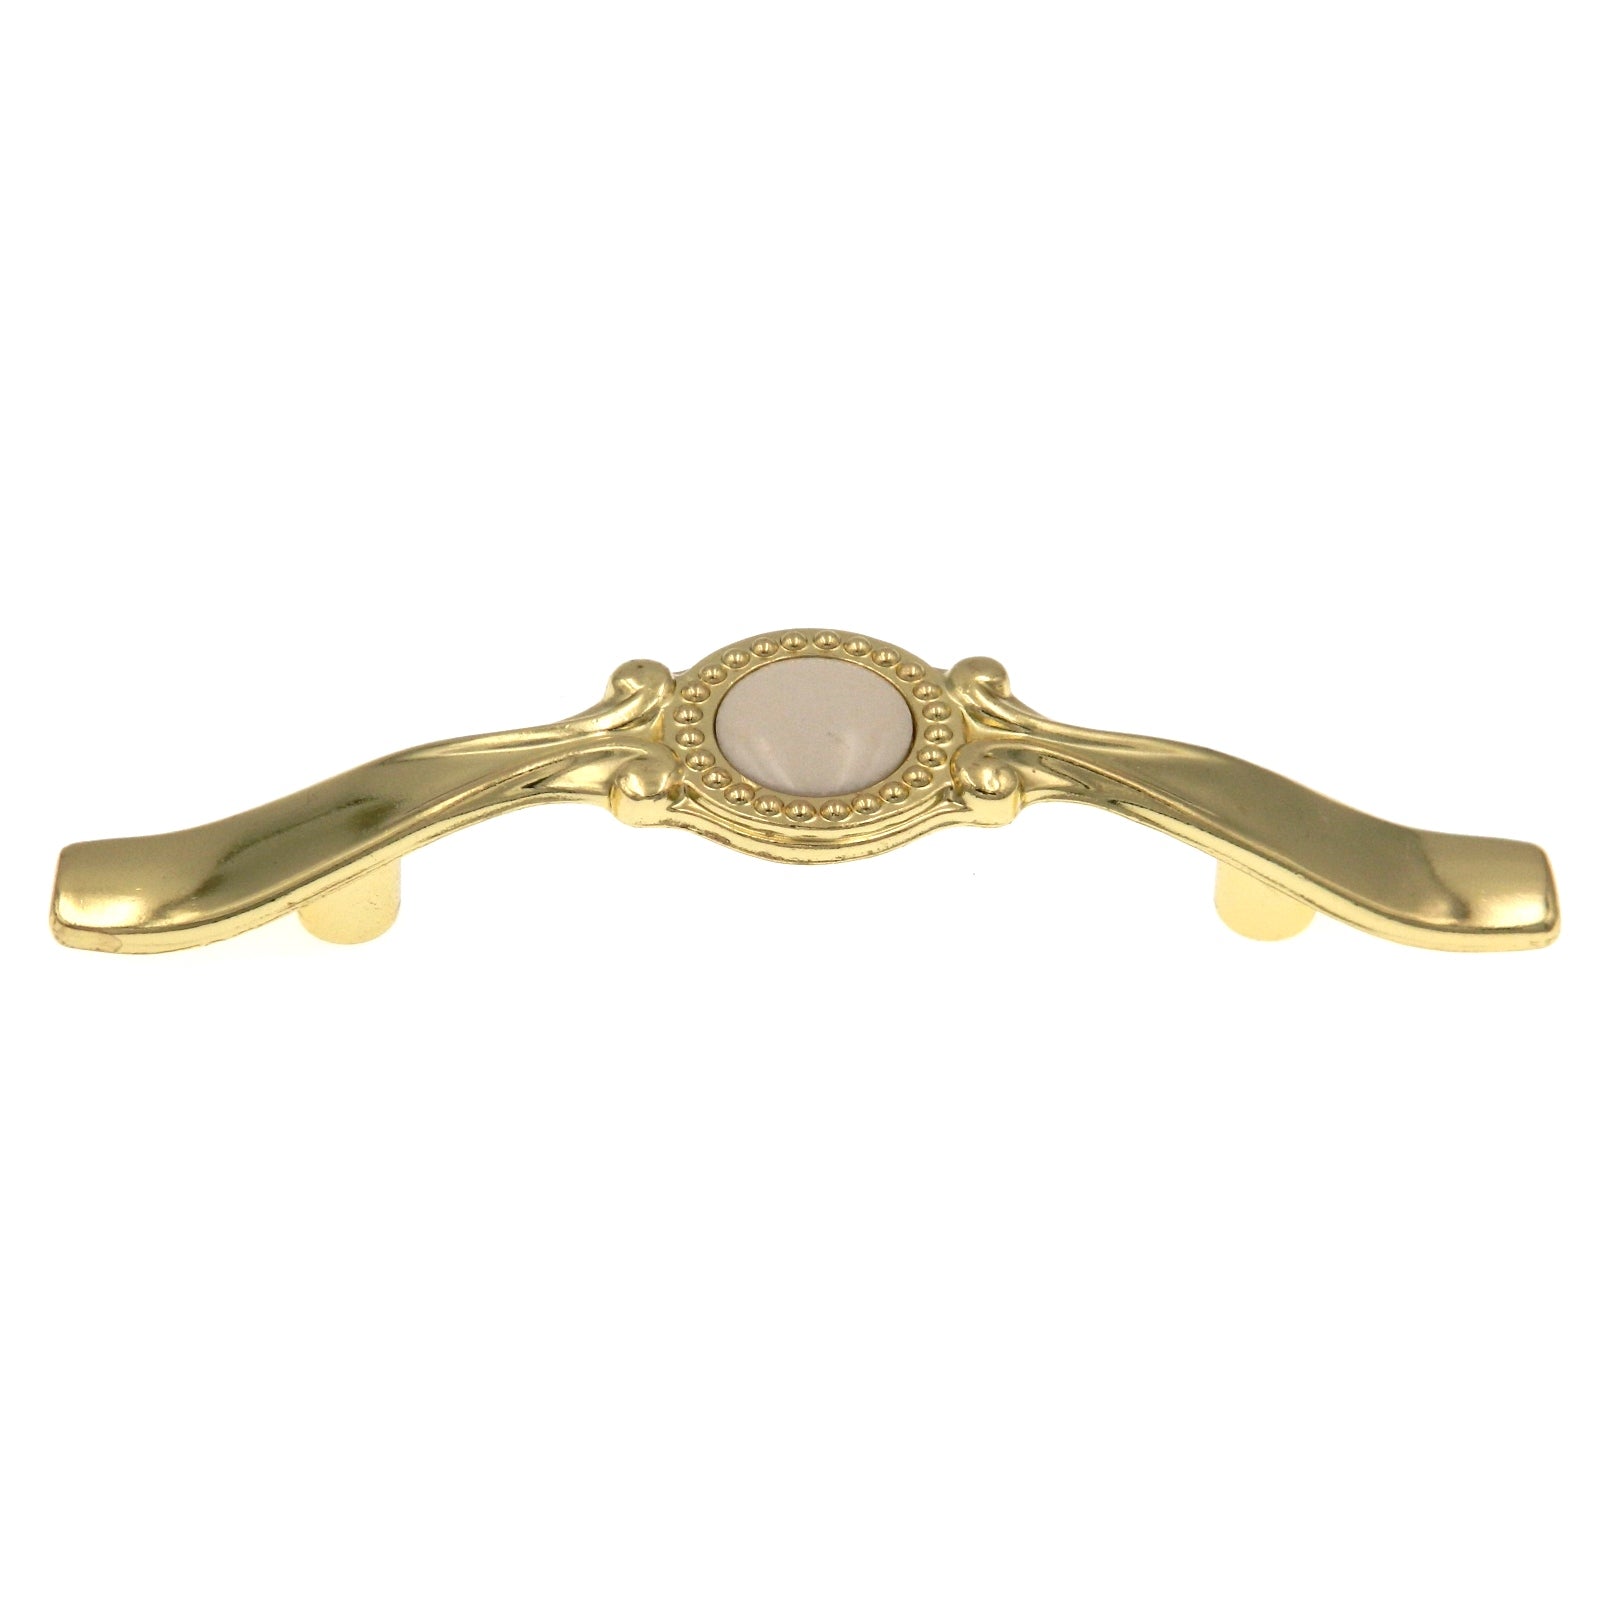 Amerock Classics Polished Brass 3" Ctr Arch Cabinet Pull White Center BP861-3